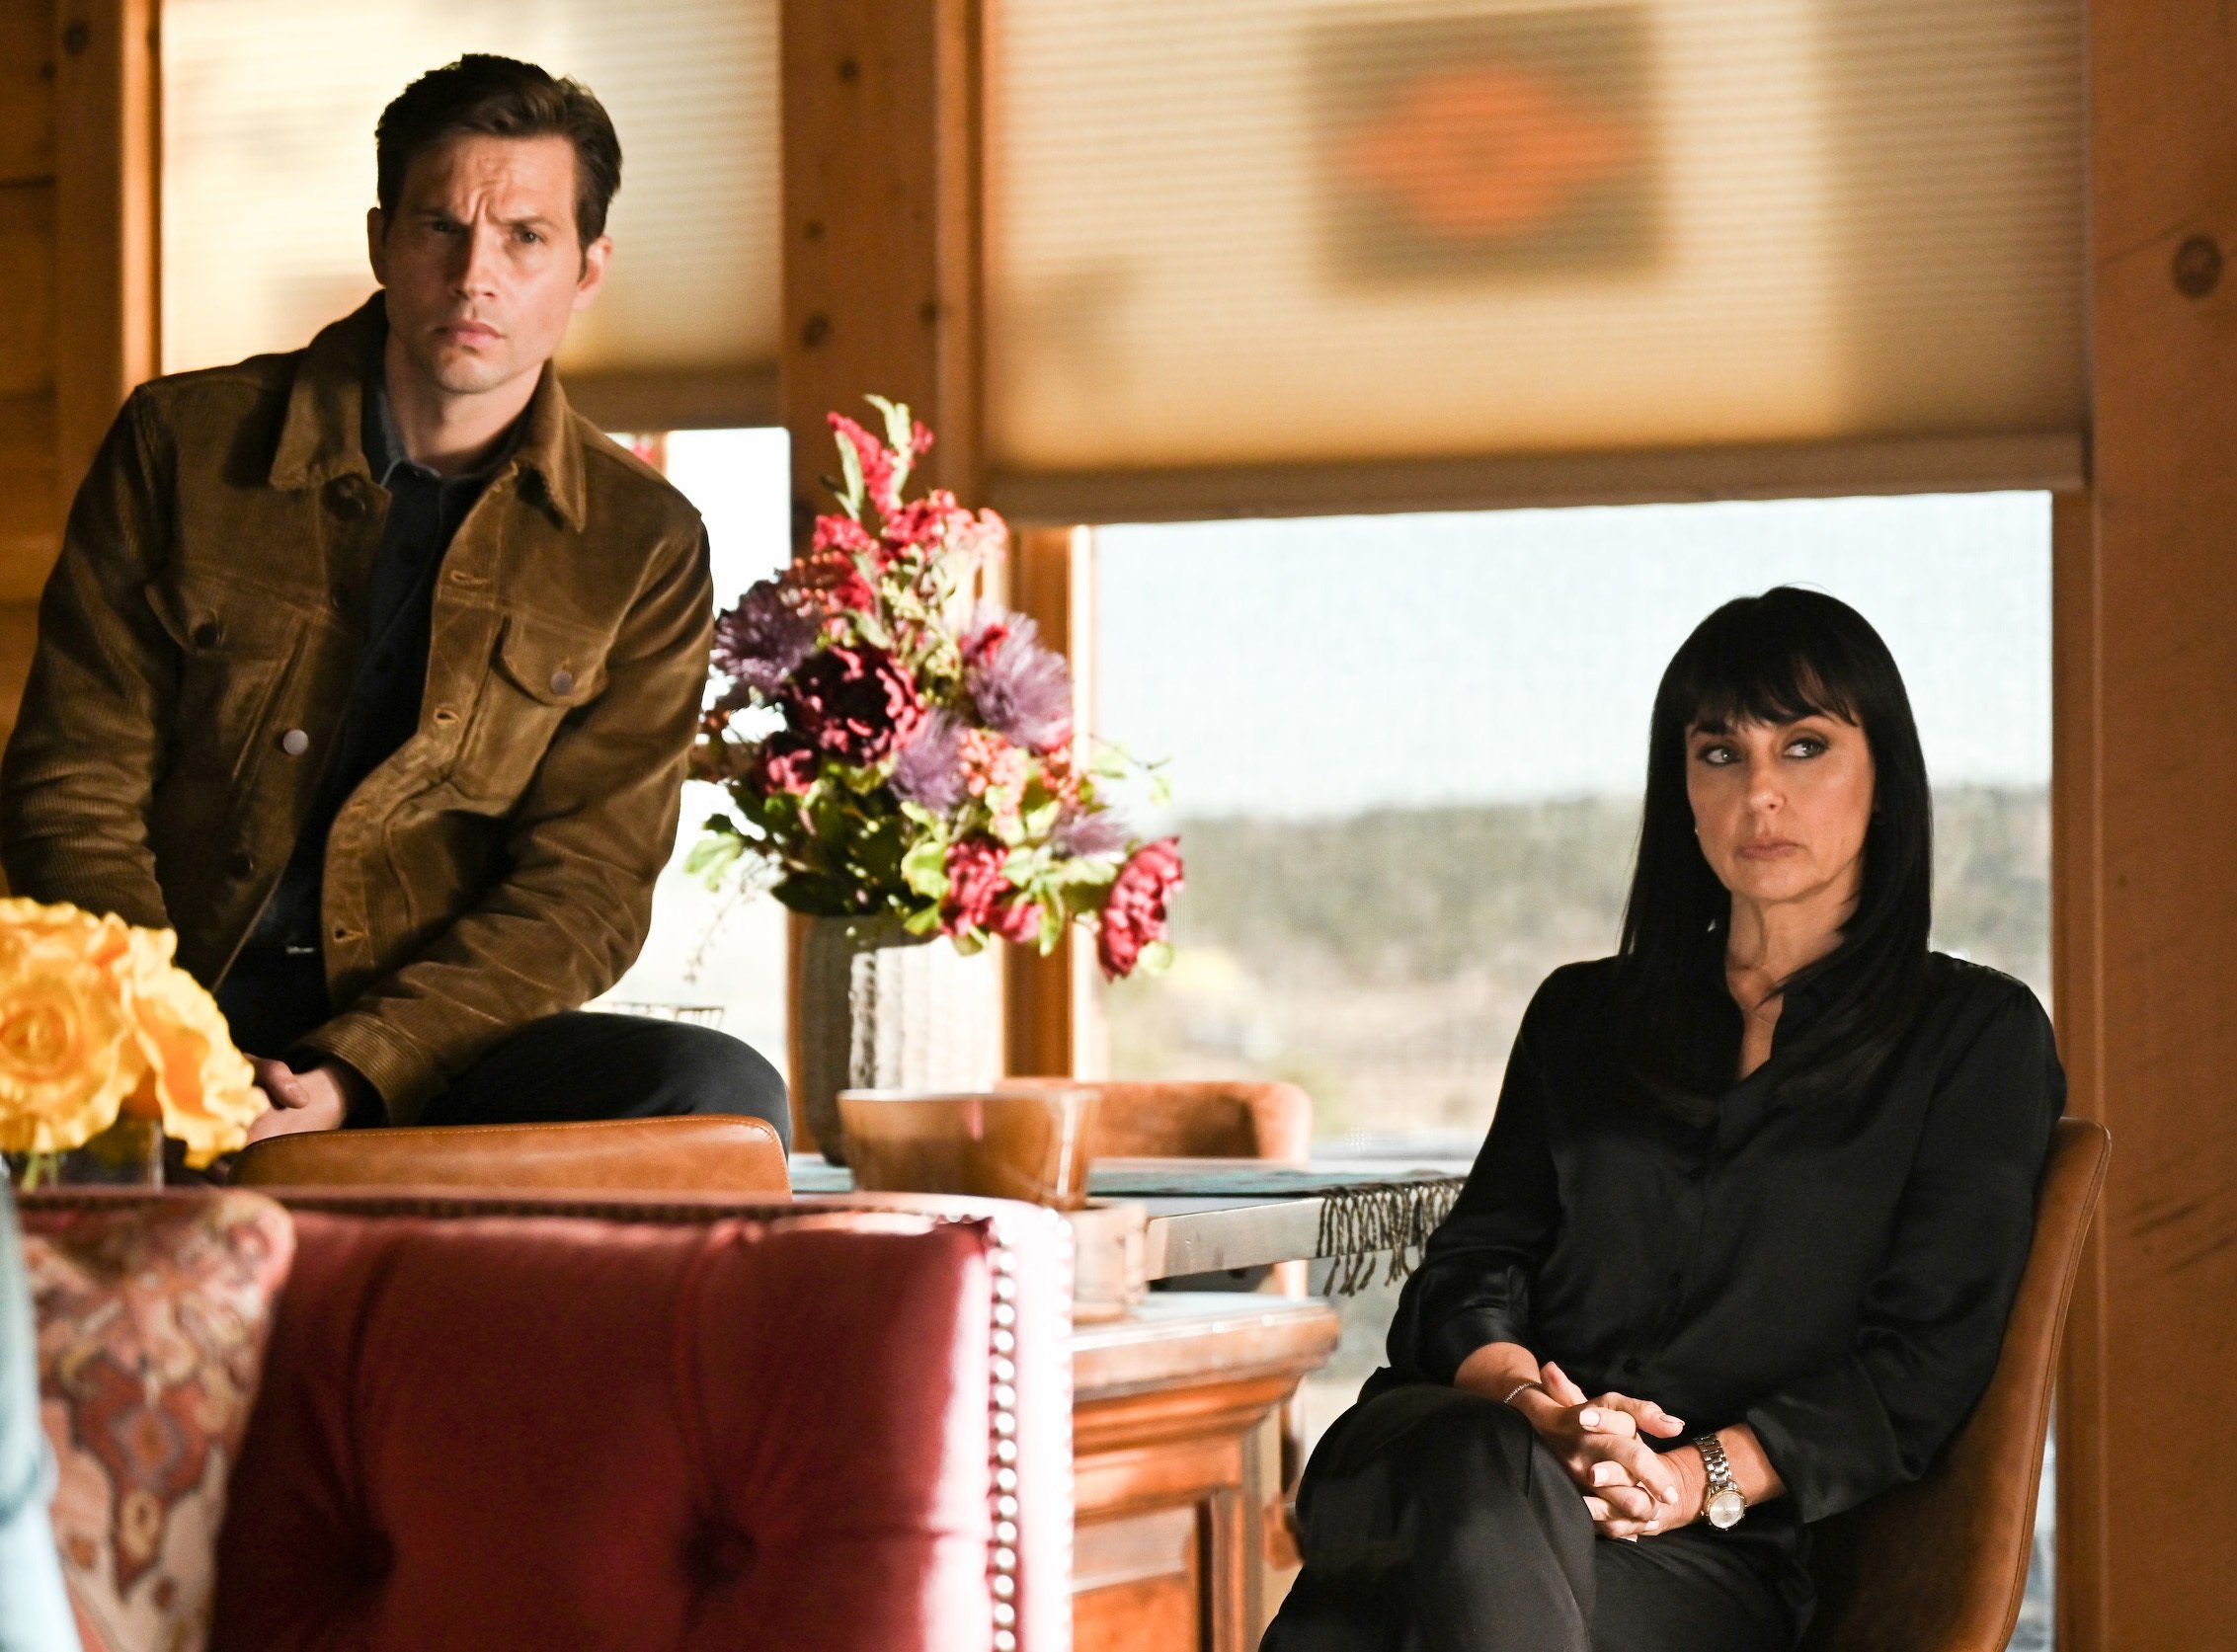 'Big Sky' Season 2 Episode 15 Logan Marshall-Green and Constance Zimmer sit looking concerned as Travis and Alicia